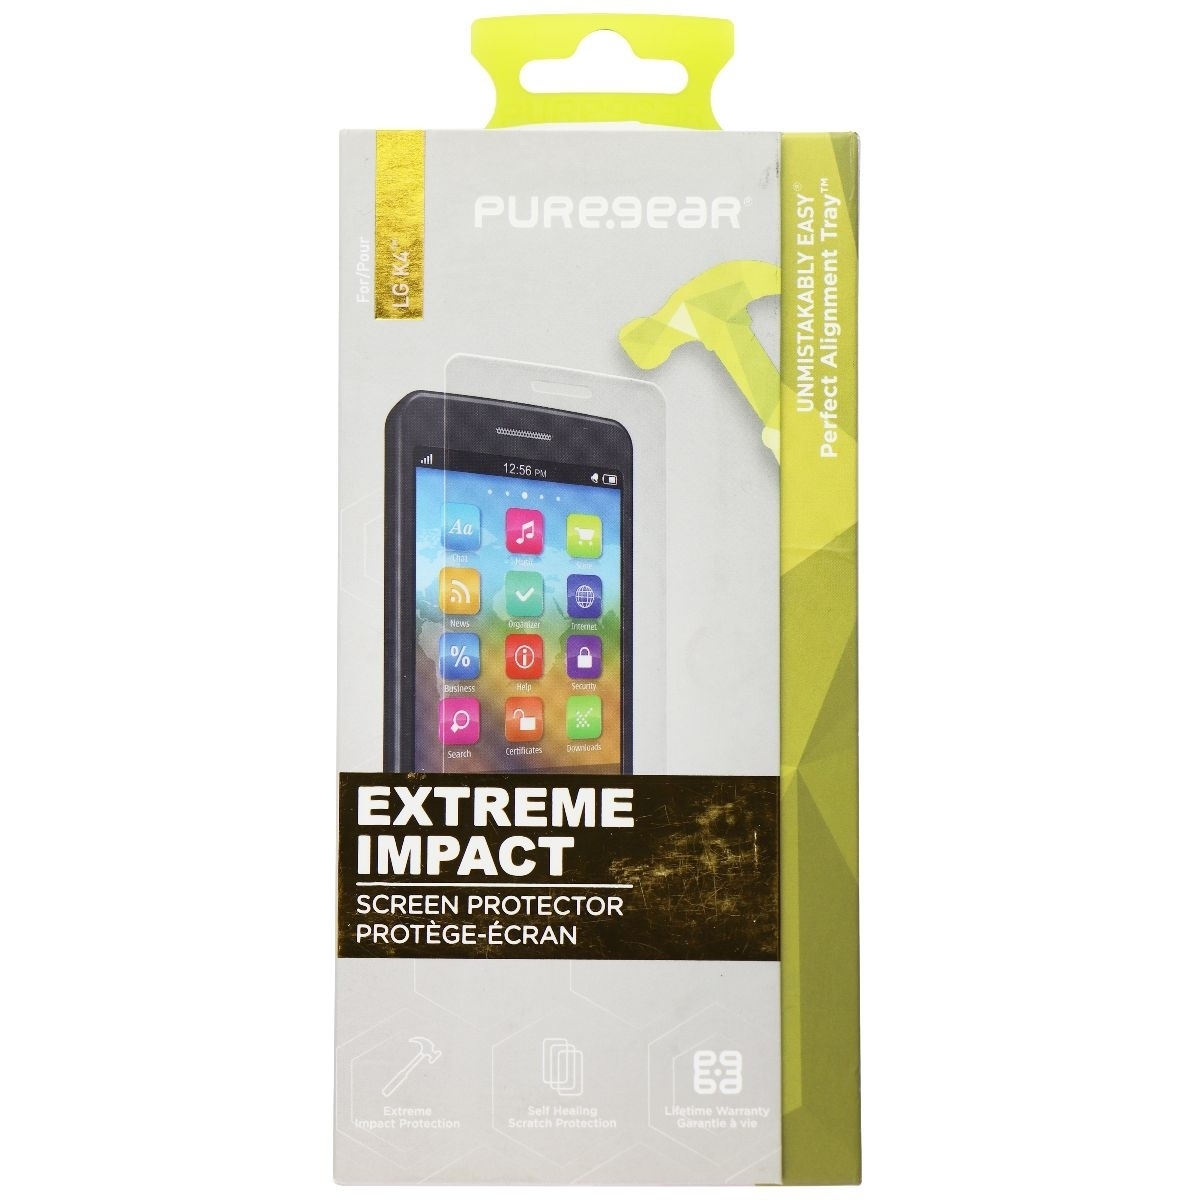 PureGear Extreme Impact Screen Protector For LG K4 (2016 Model) - Clear (Refurbished)